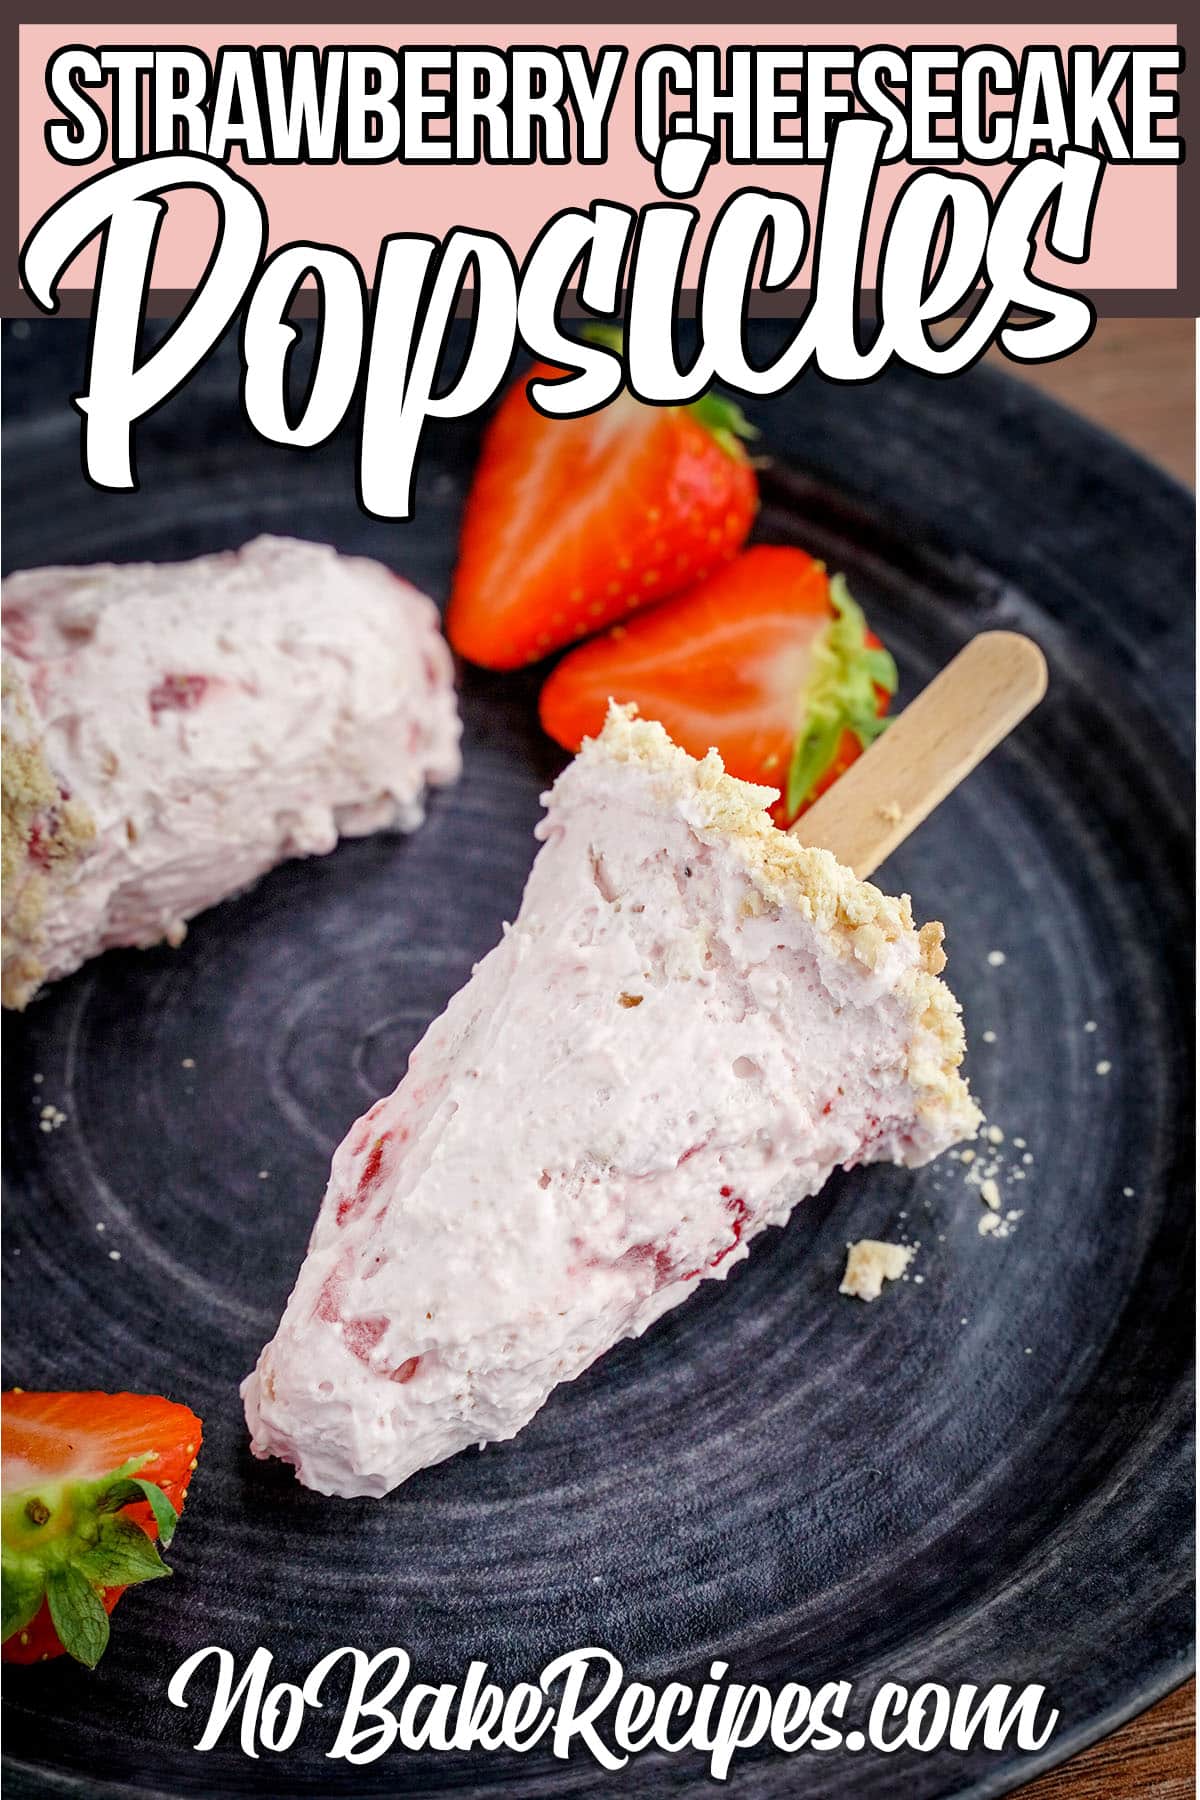 cheesecake and strawberry popsicles laying on a plate with text which reads strawberry cheesecake popsicles